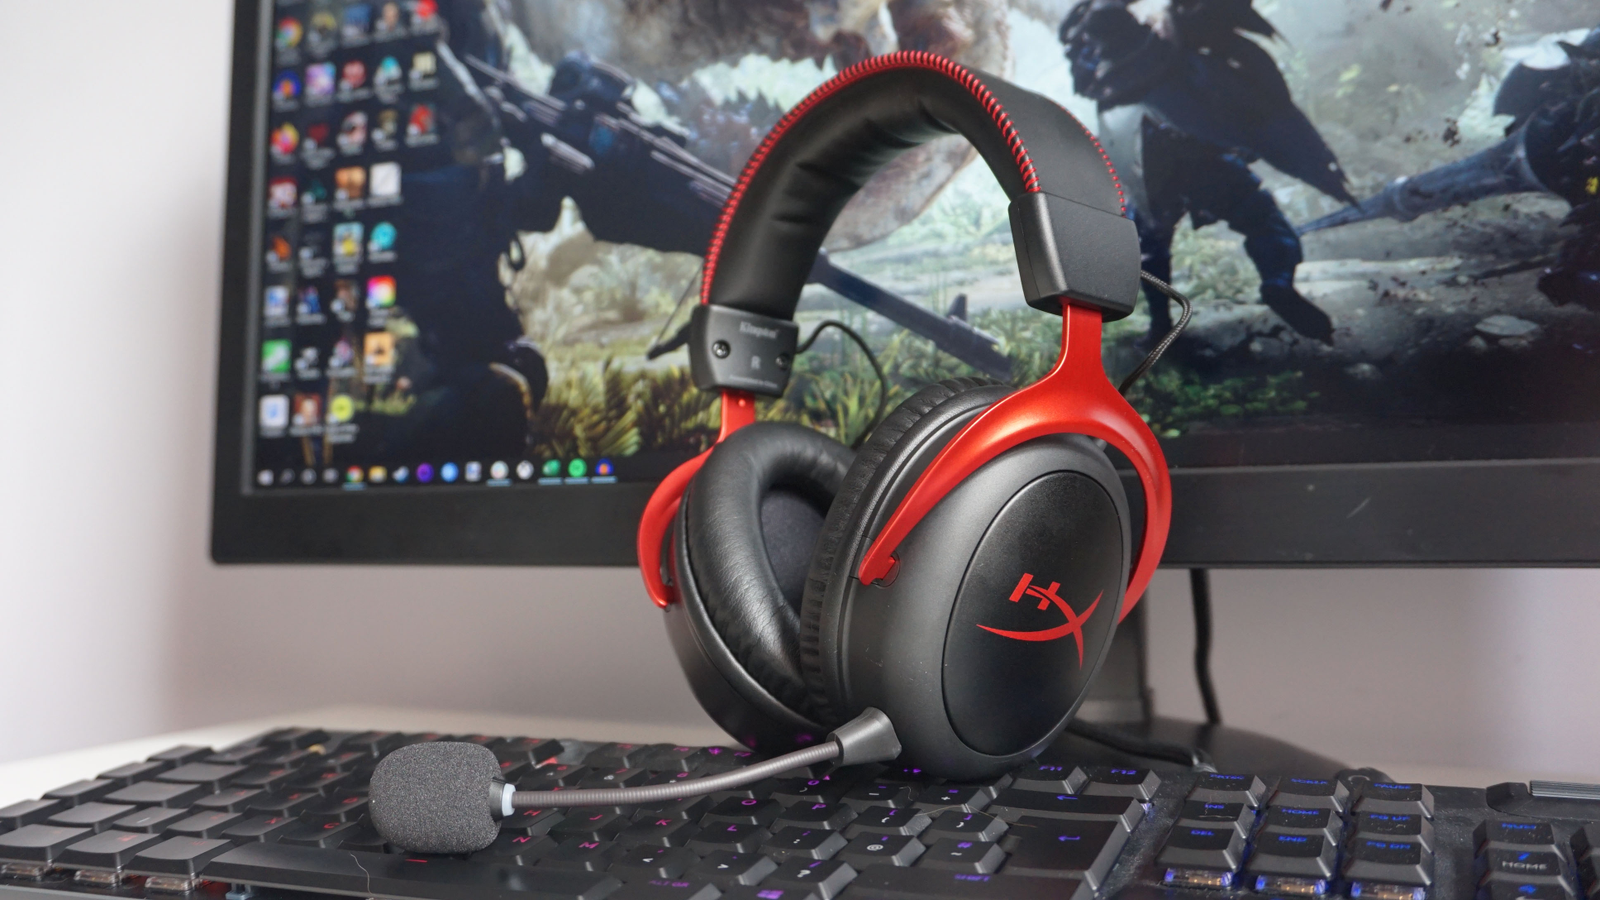 HyperX Cloud 2 Wireless review: Untethered